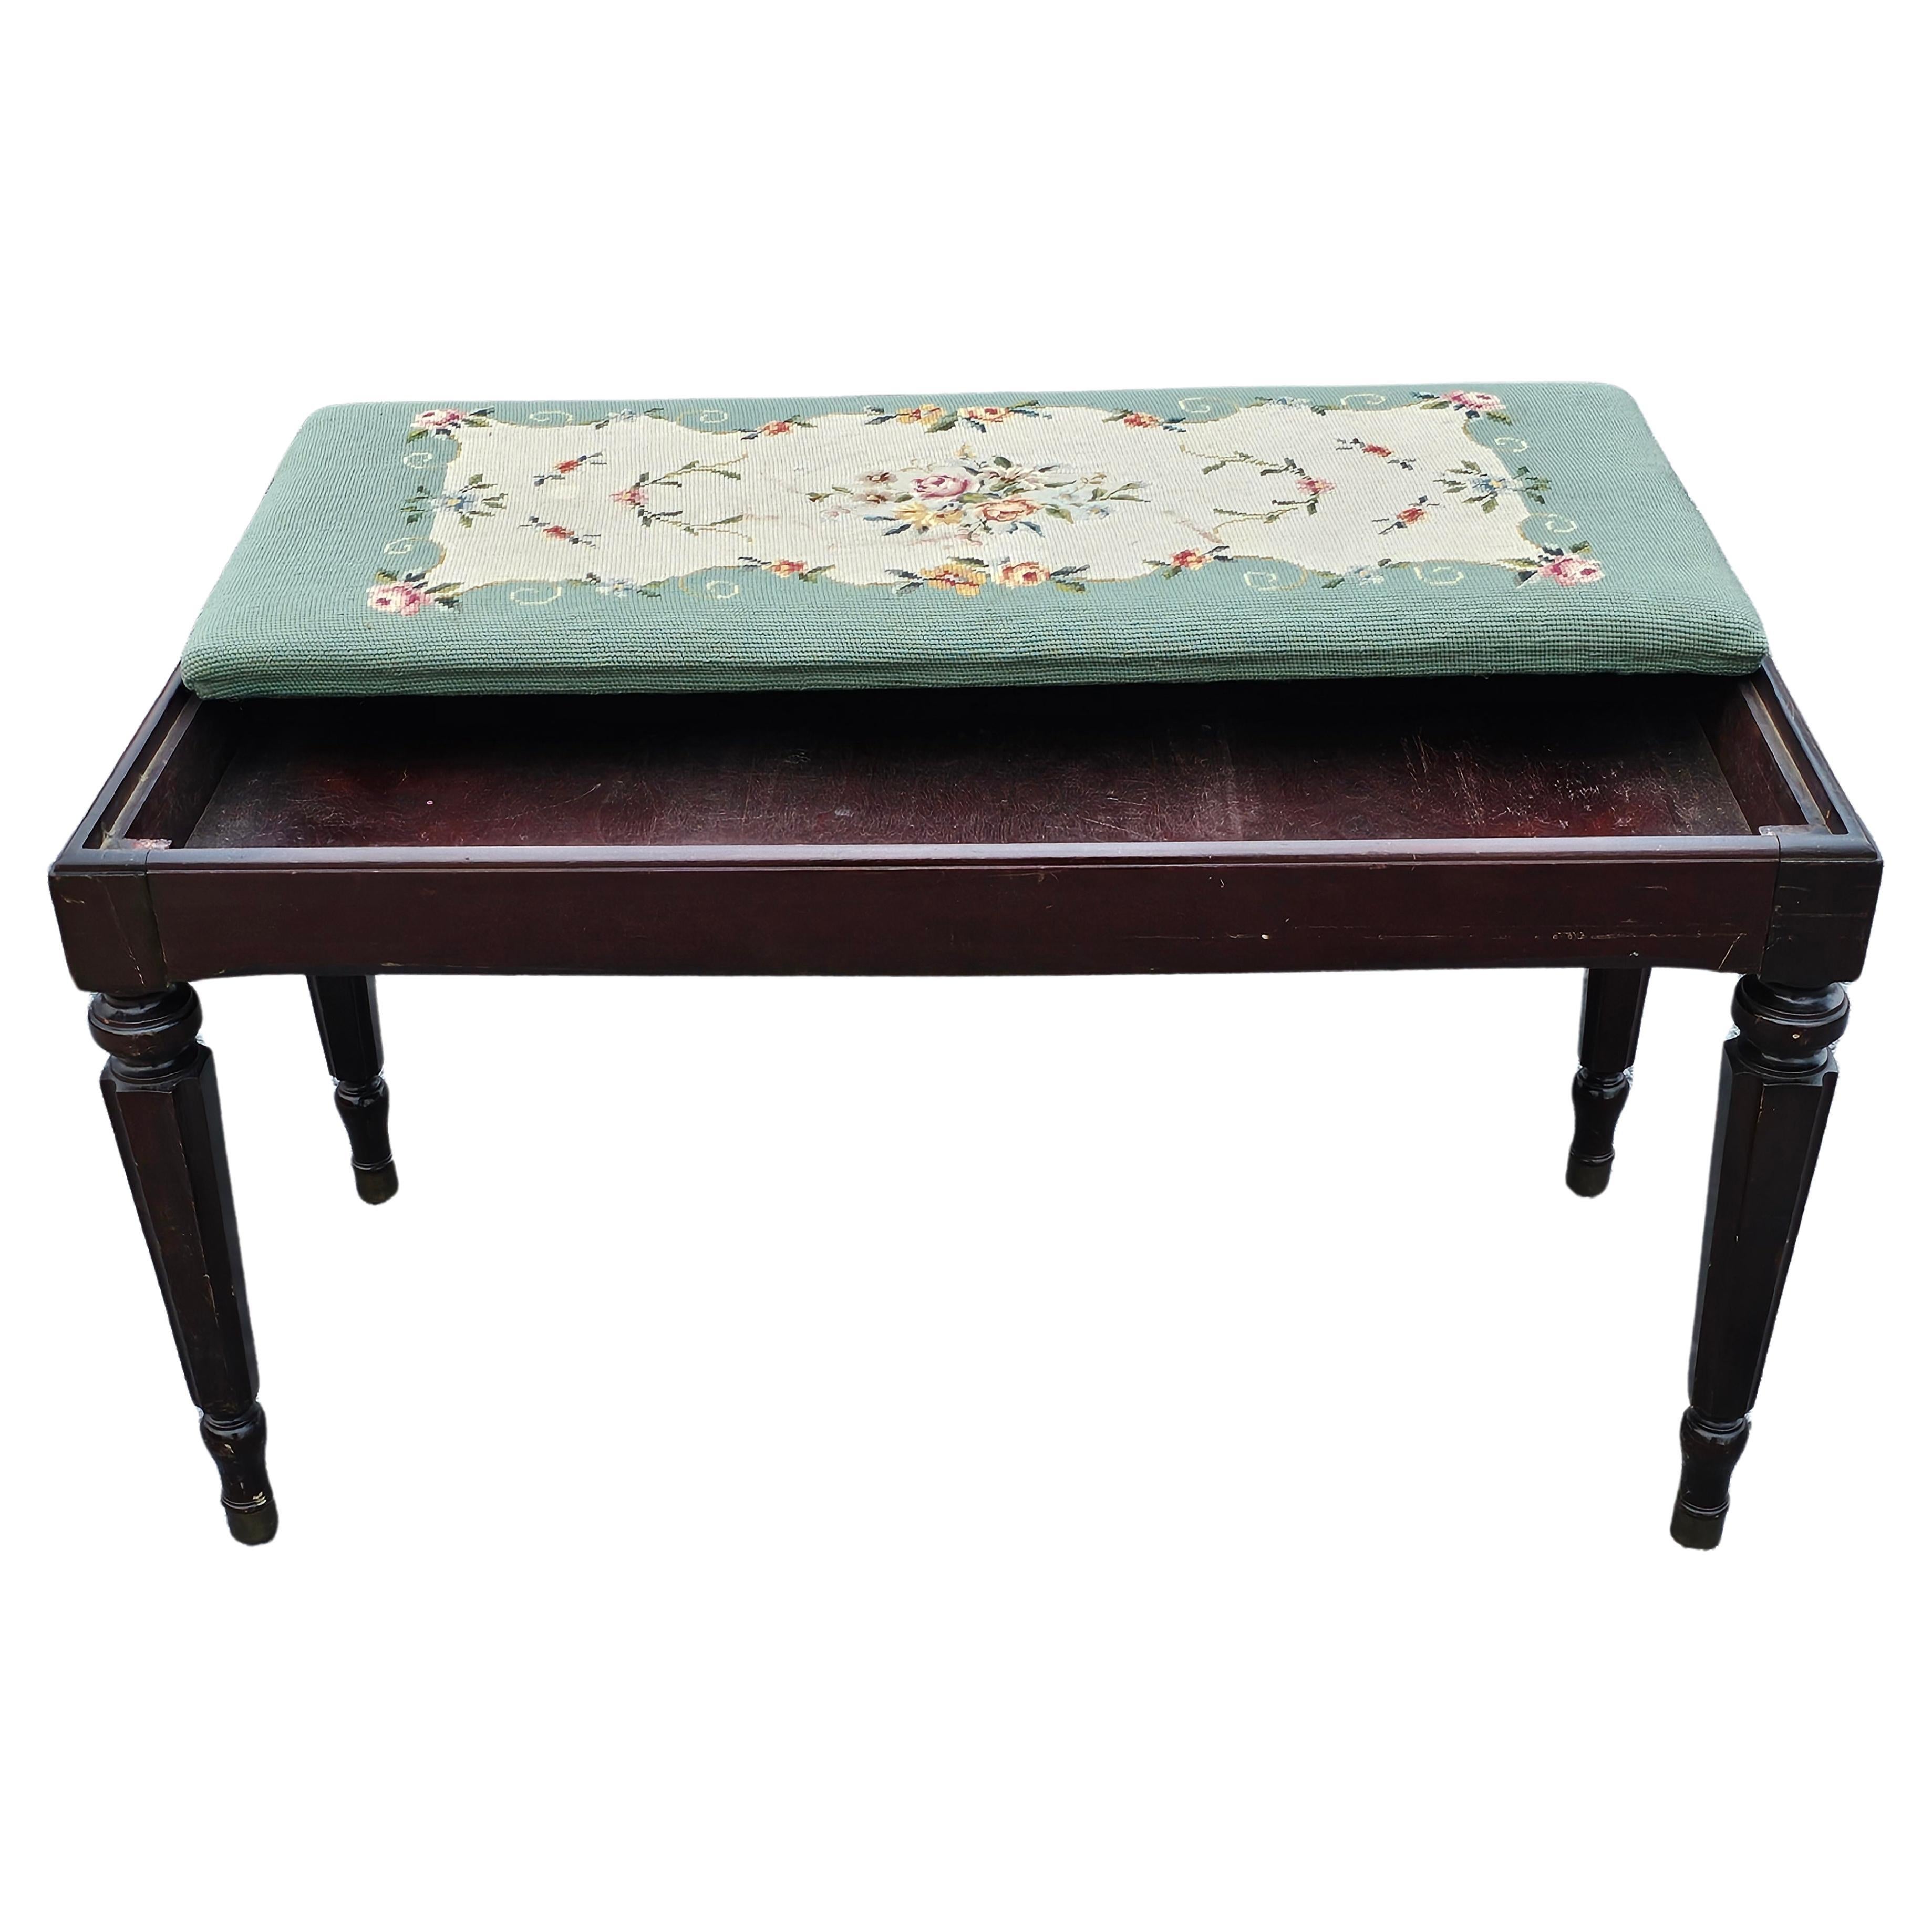 Mid 20th Century Mahogany and Needlepoint Upholstered Bench with under seat Storage. 
Measures 34